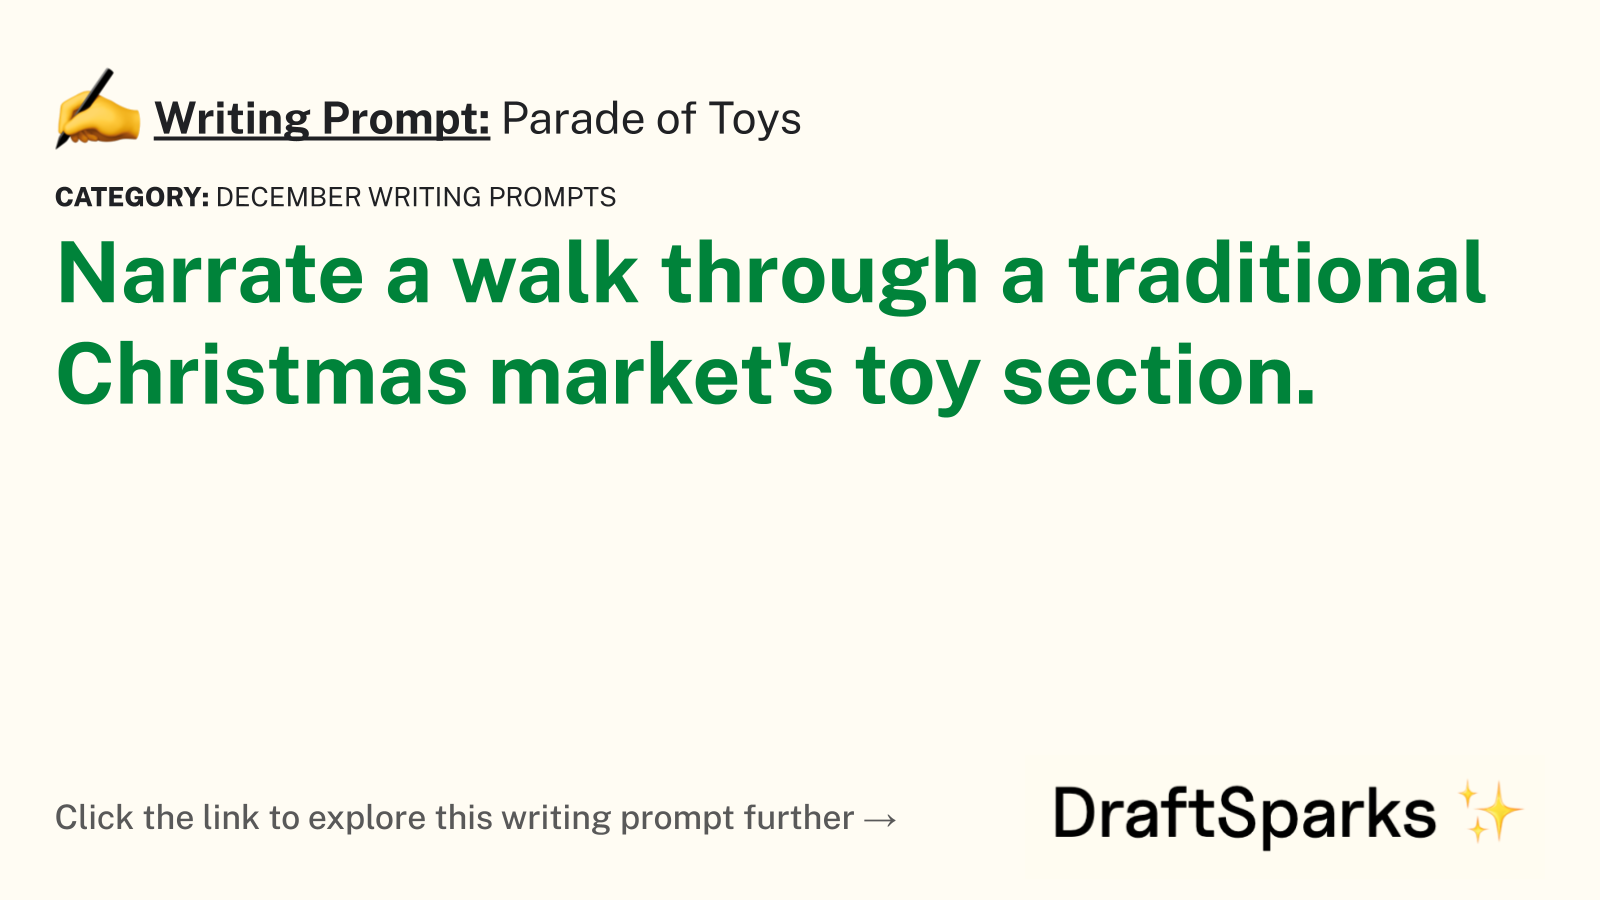 Parade of Toys